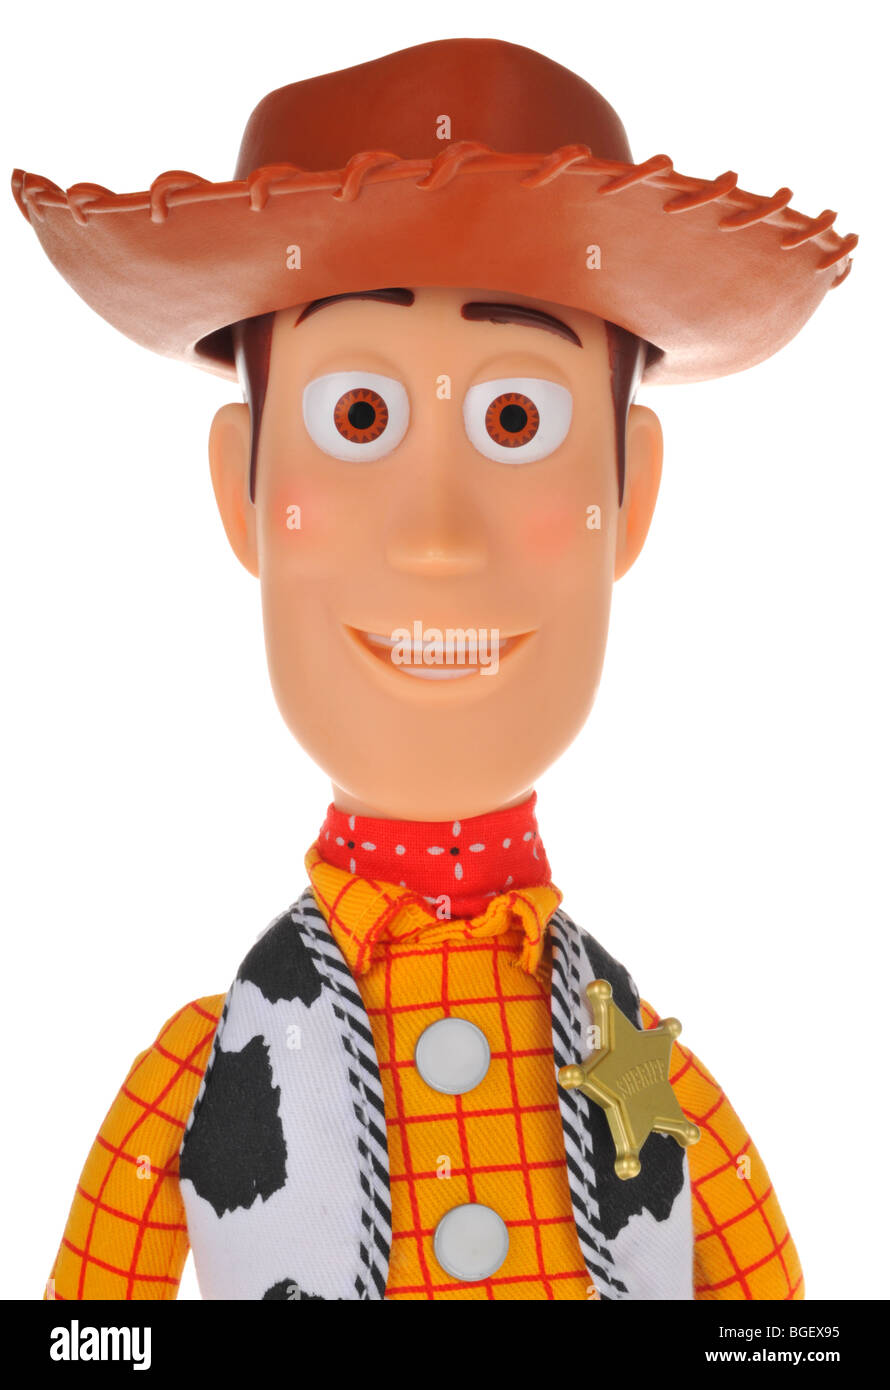 Woody cowboy figure from the film 'Toy Story' Stock Photo